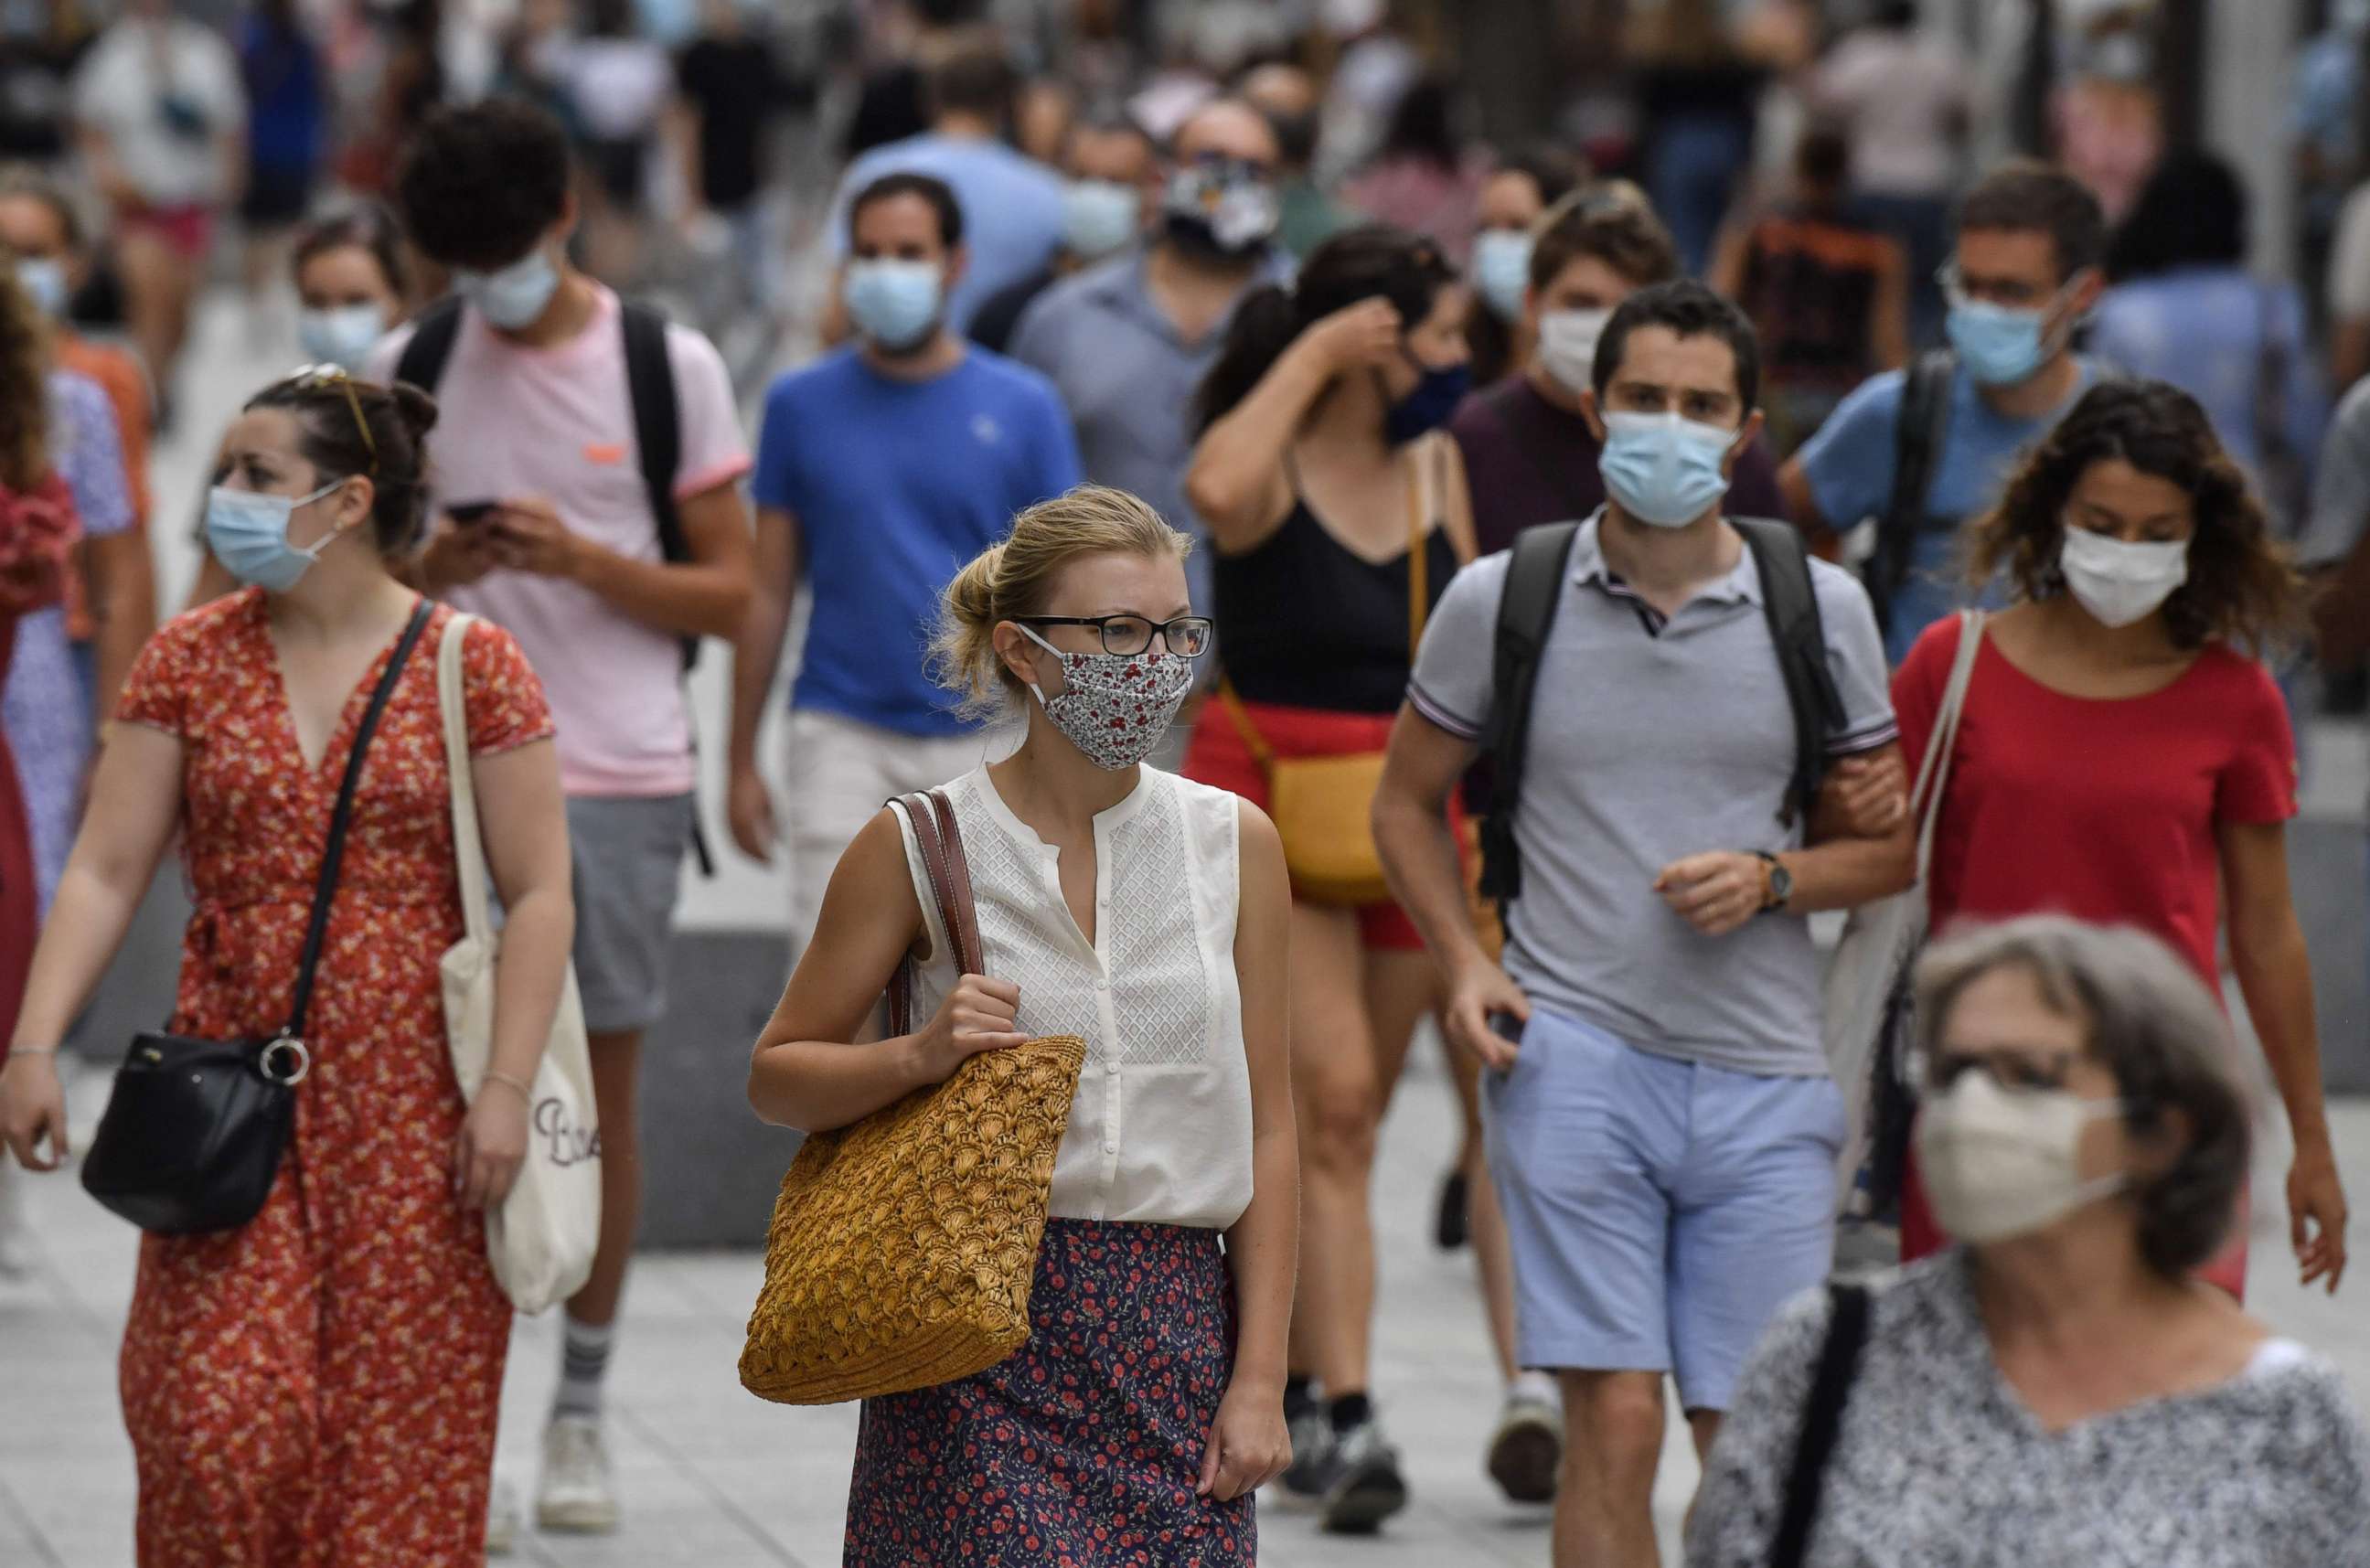 PHOTO: People wearing face masks walk on a pedestrian street in Lyon, France, on Aug. 22, 2020, on the first day of mandatory mask wearing in parts of the city center. 